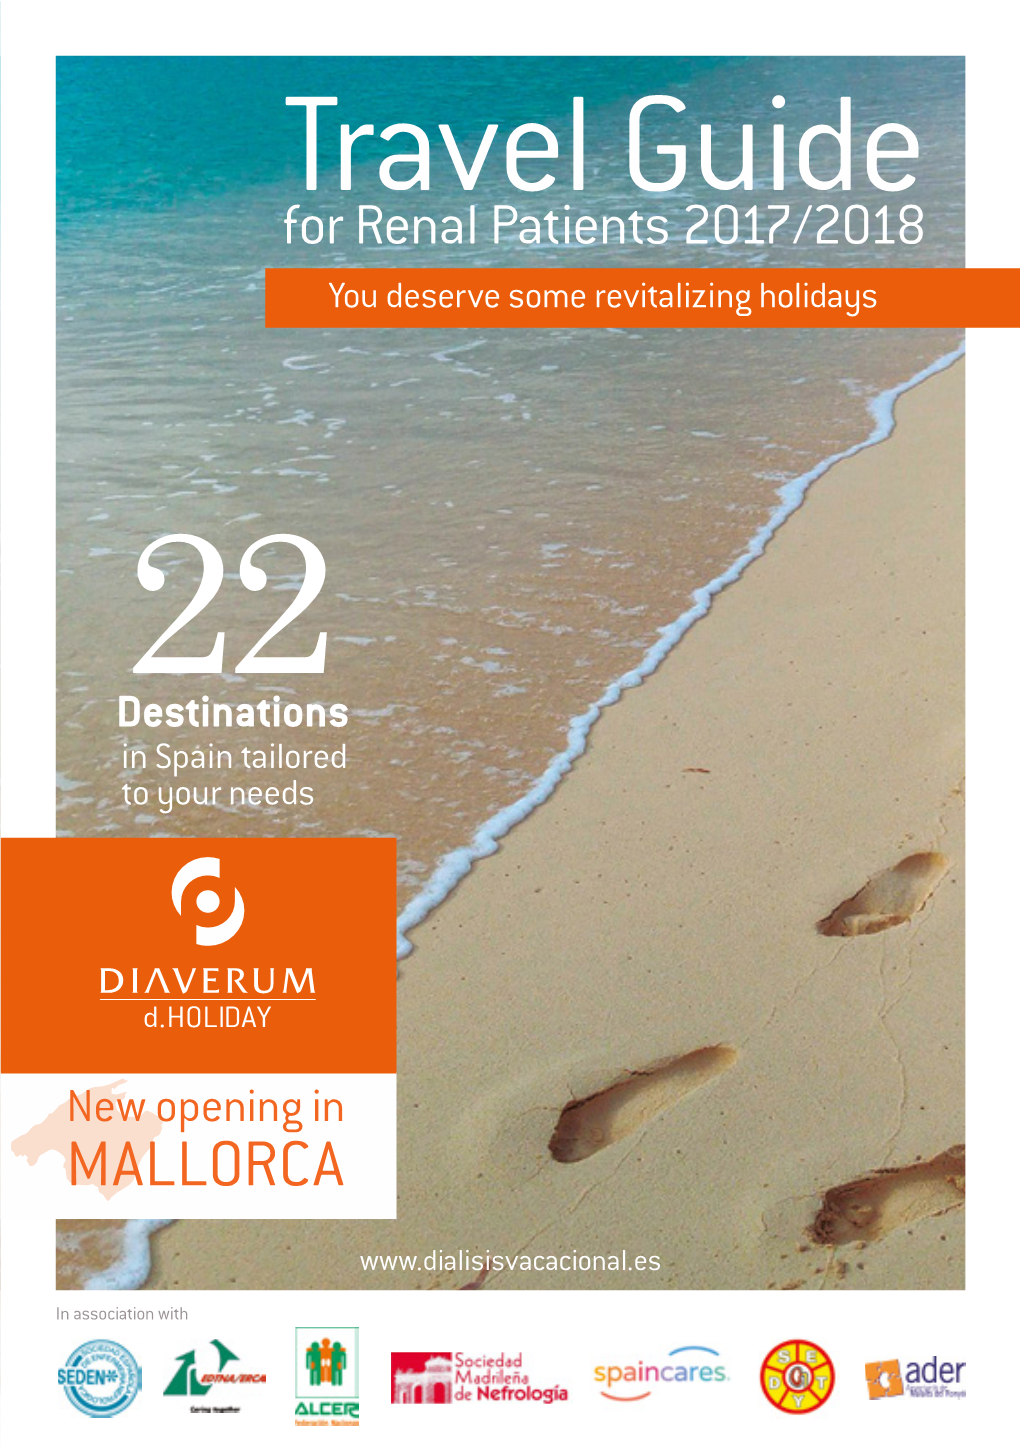 Travel Guide for Renal Patients 2017/2018 You Deserve Some Revitalizing Holidays